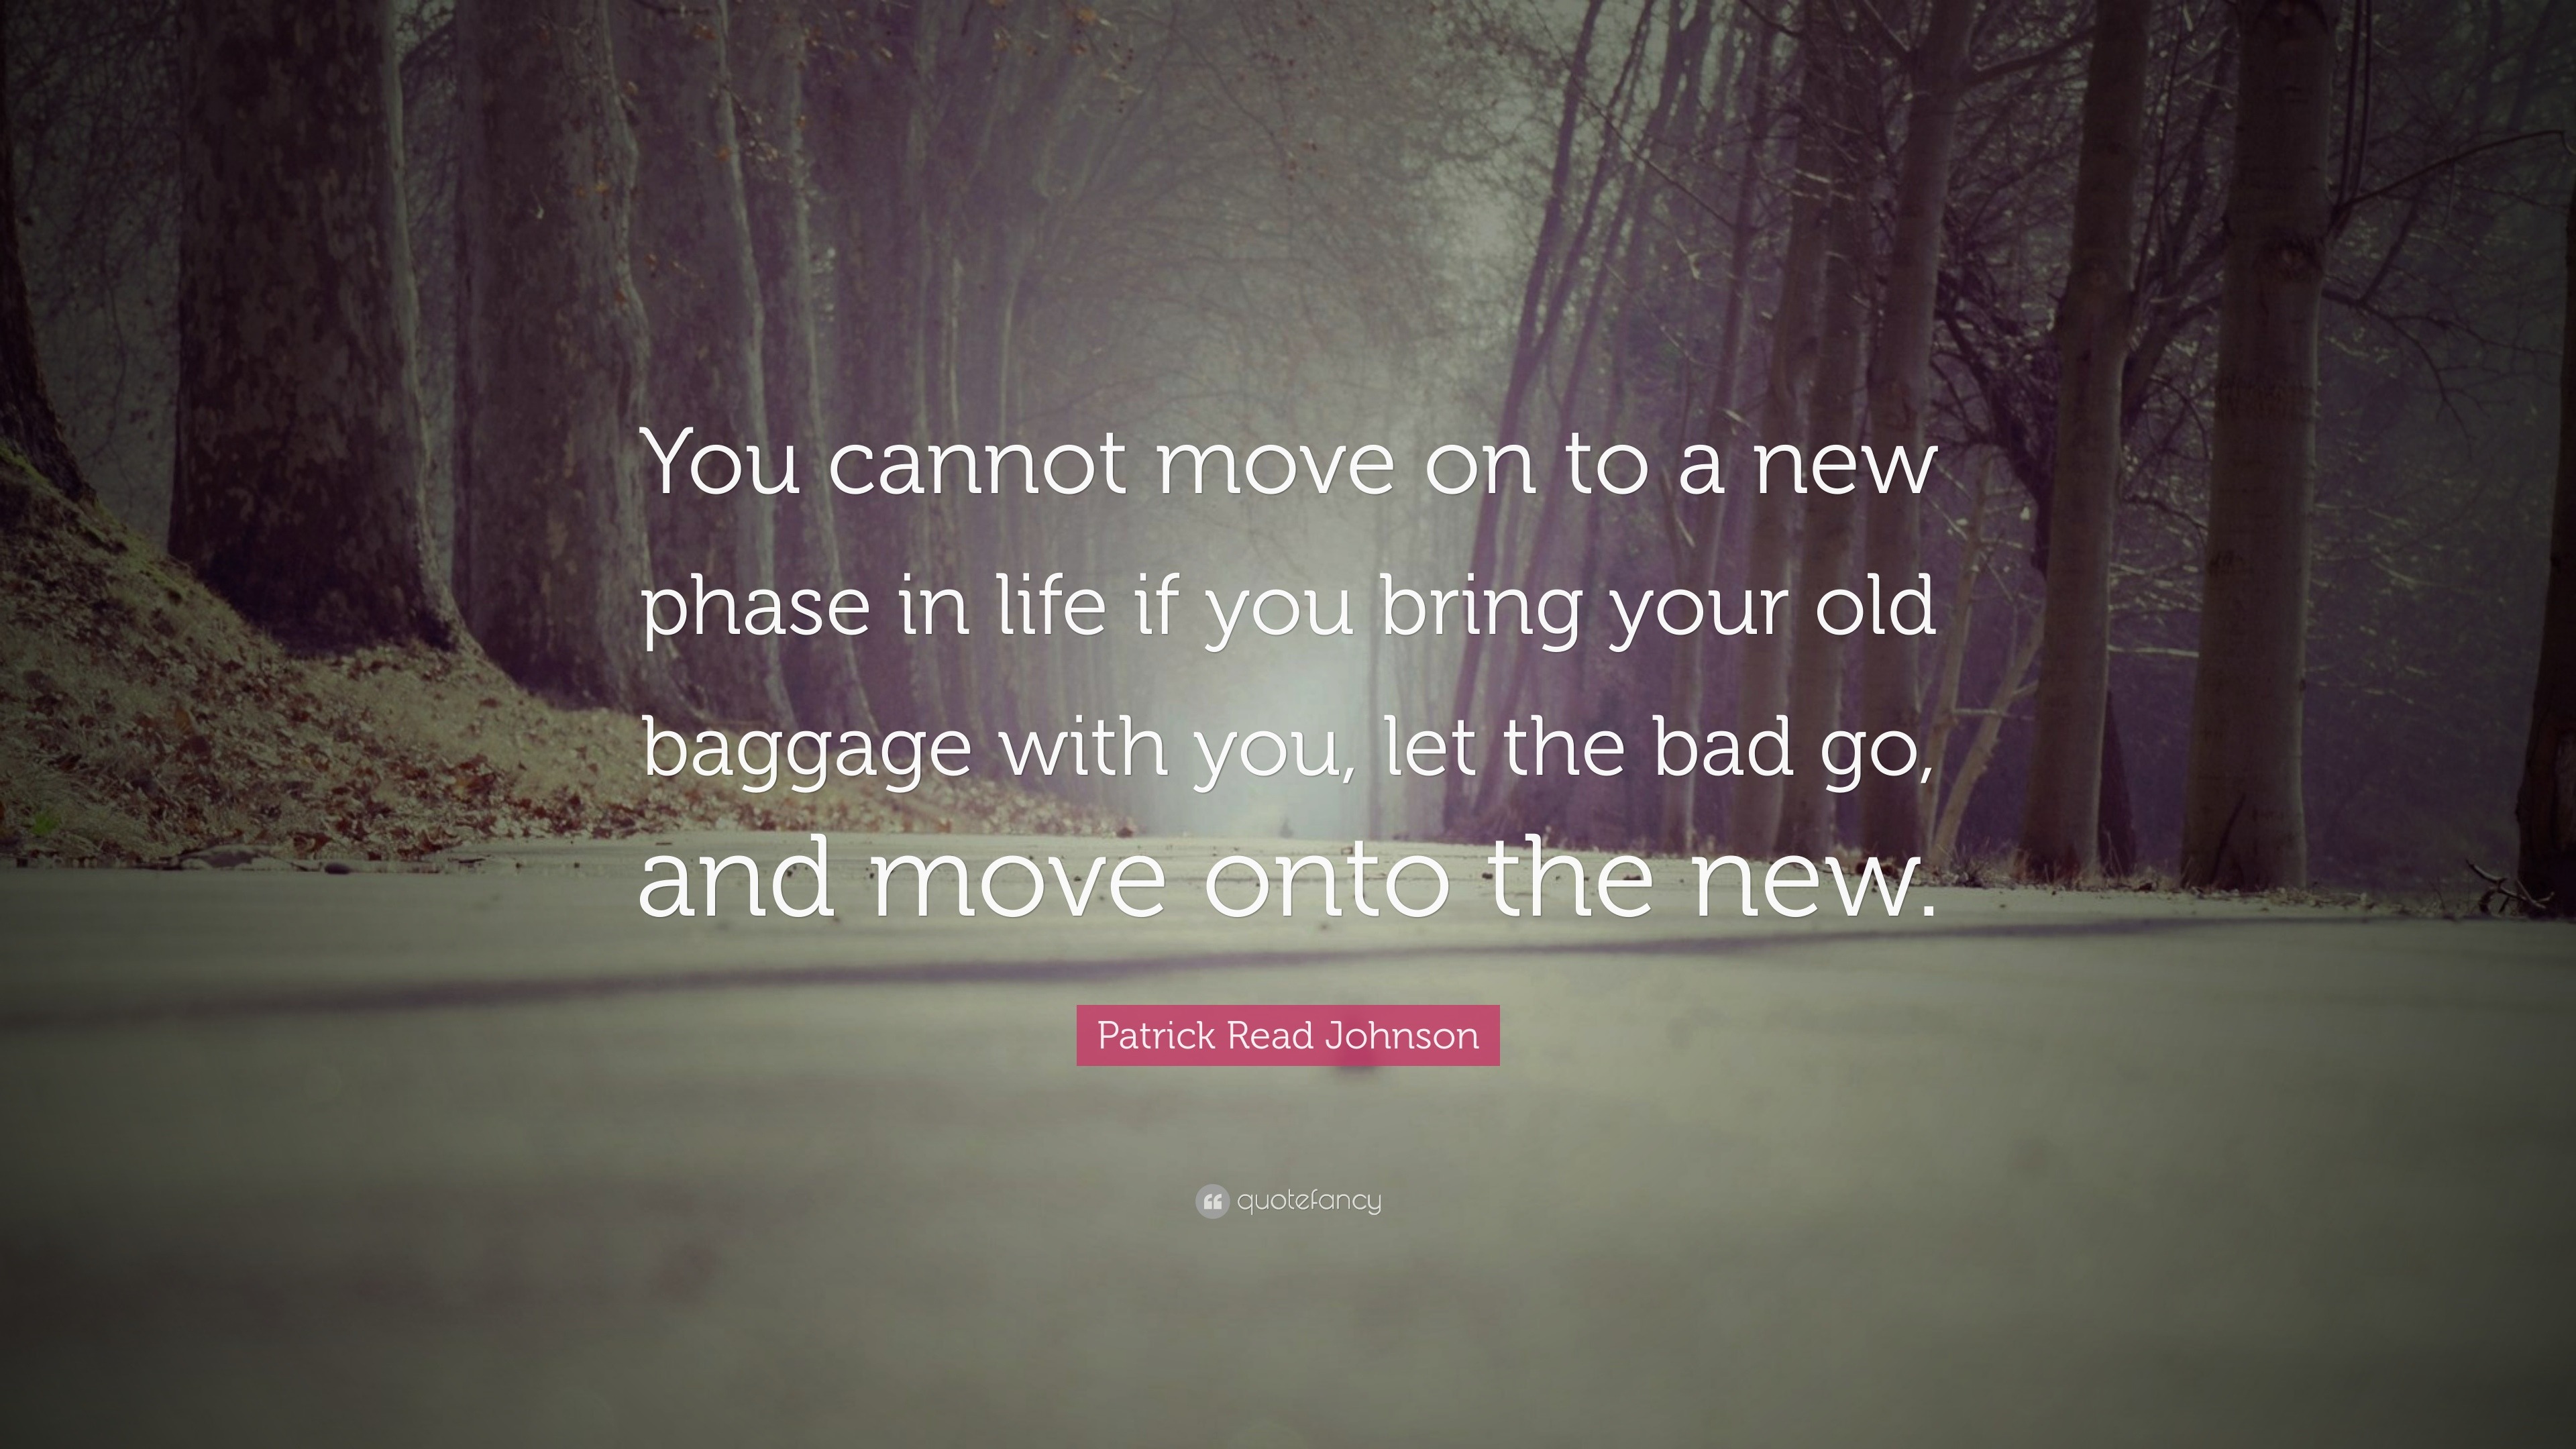 Patrick Read Johnson Quote: “You Cannot Move On To A New Phase In Life If You